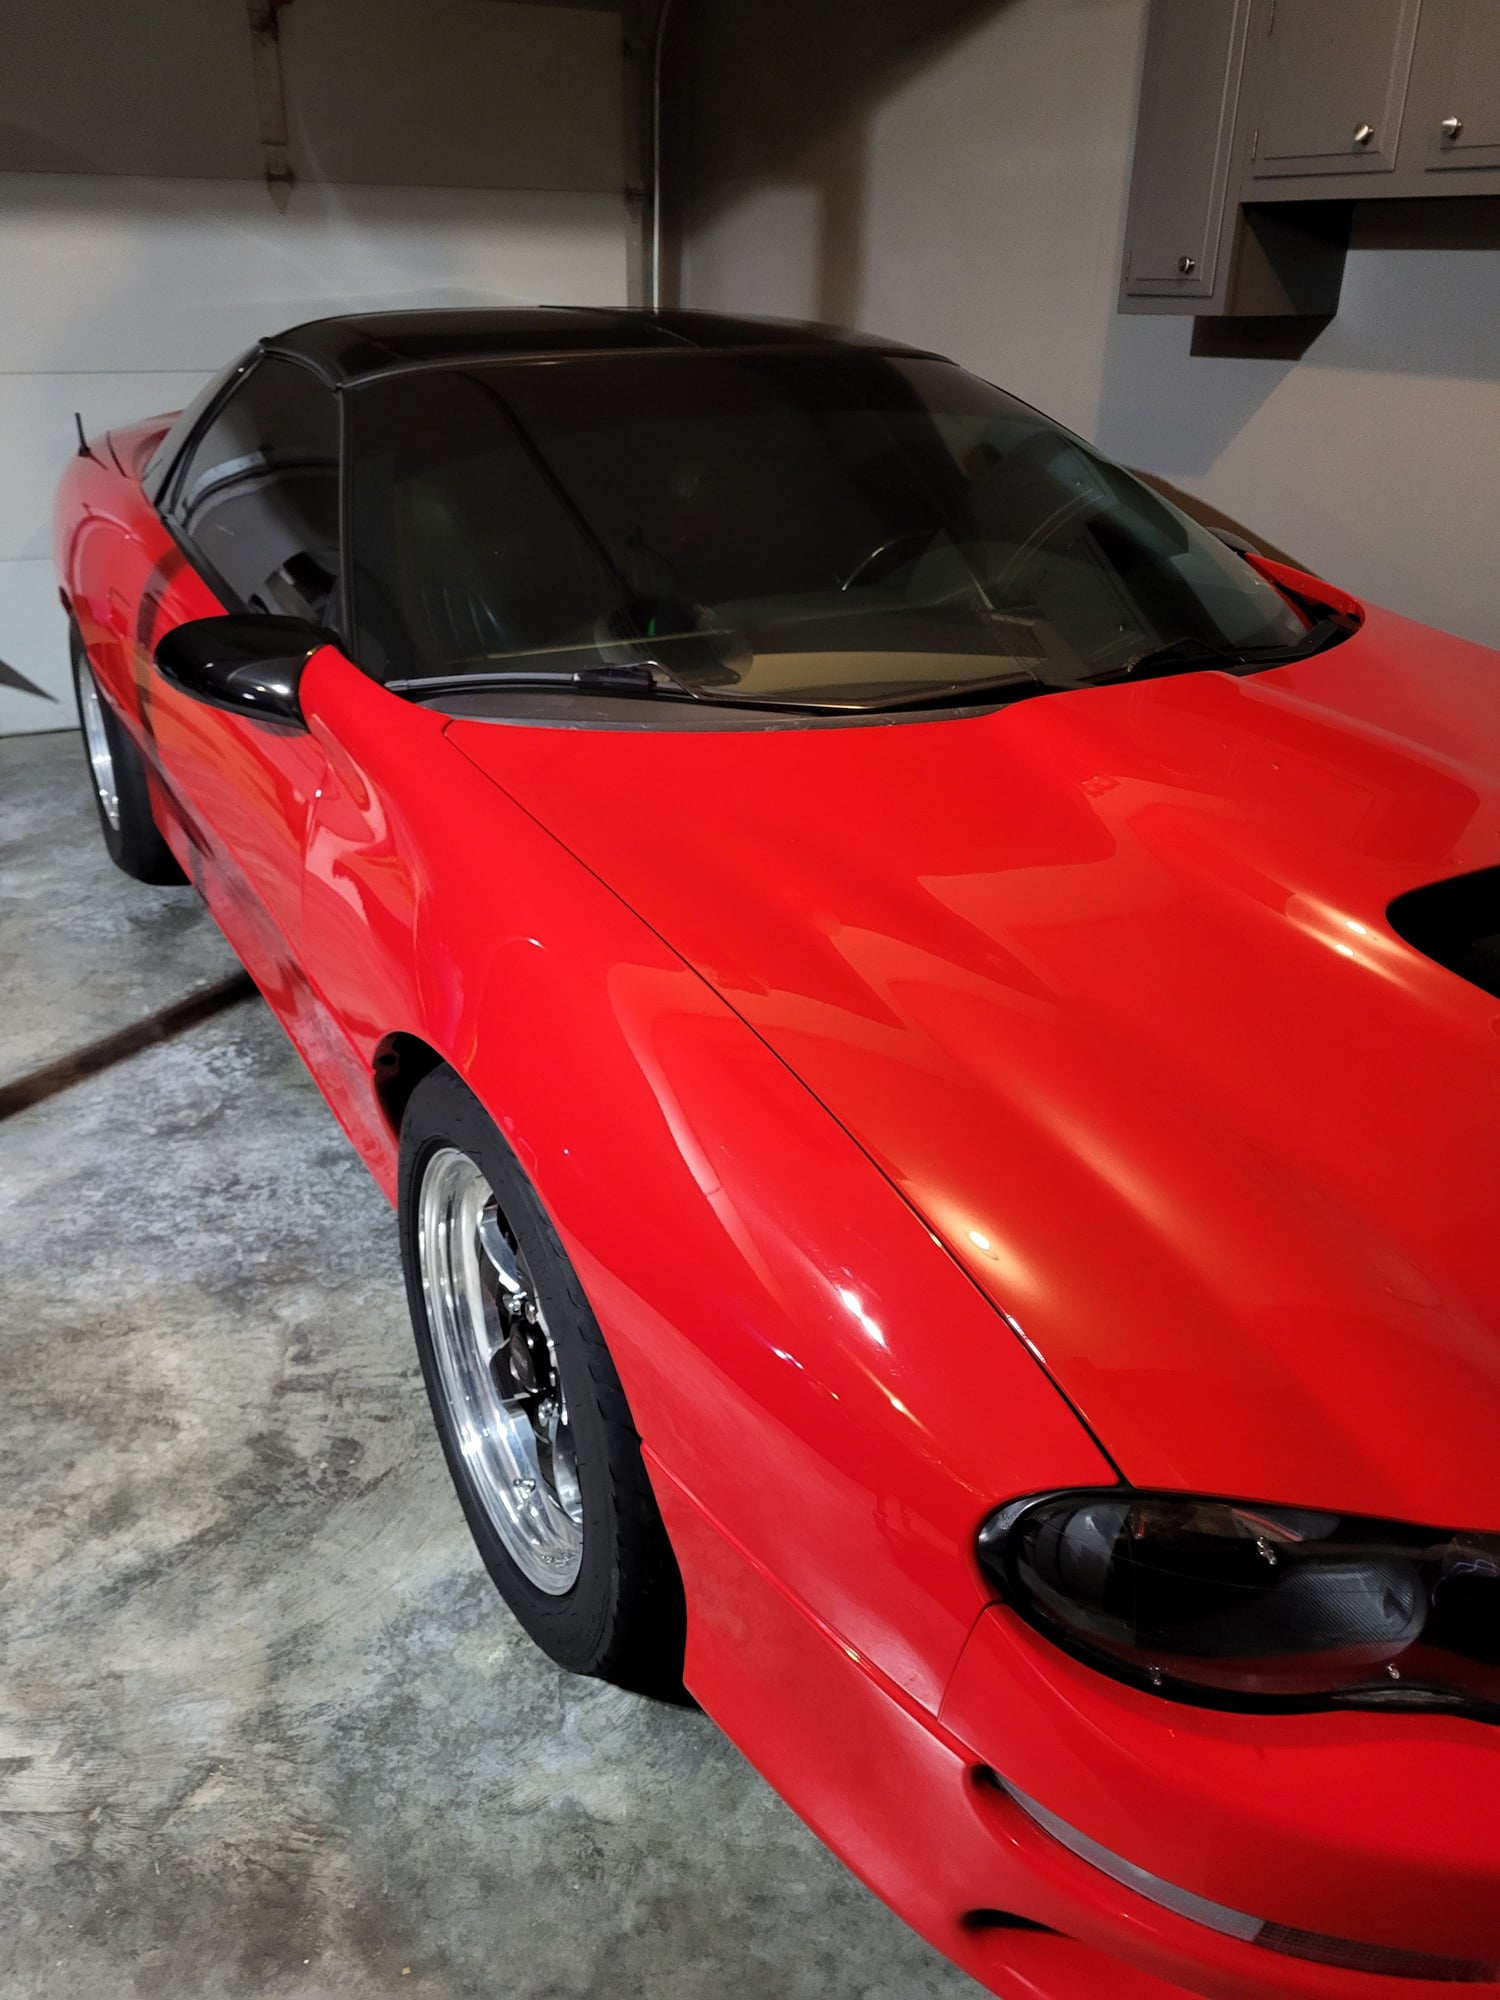 1999 Chevrolet Camaro - 99 low mileage built 388 - Used - VIN 2G1FP22G9X2134986 - 62,200 Miles - 8 cyl - 2WD - Automatic - Coupe - Red - Kearney, MO 64060, United States